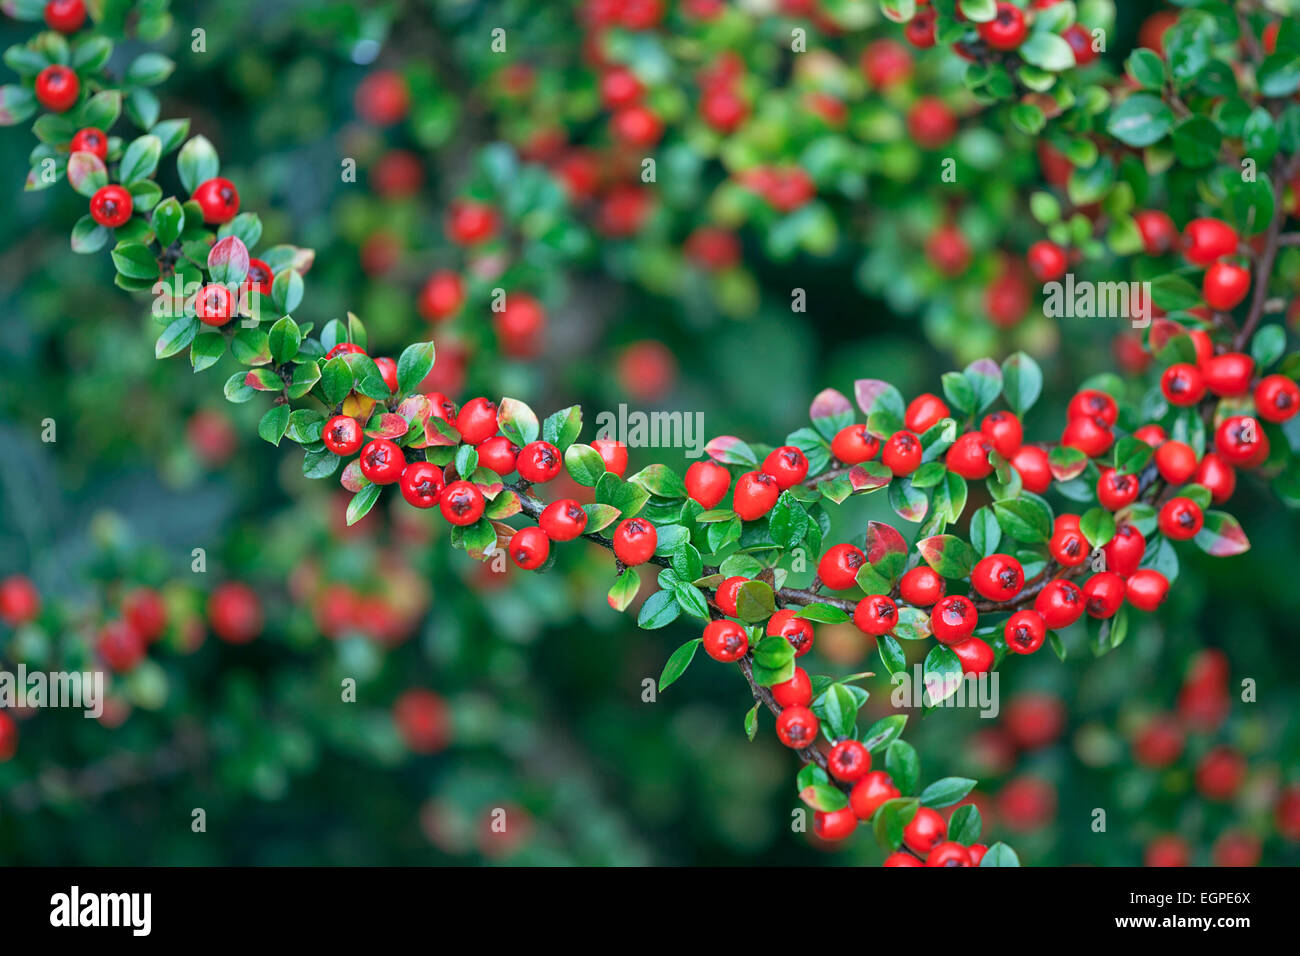 Cotoneaster, Cotoneaster x suecicus 'Coral Beauty', Front view of twig closely packed with lots of small green leaves and red berries, Rest of shrub behind in soft focus. Stock Photo